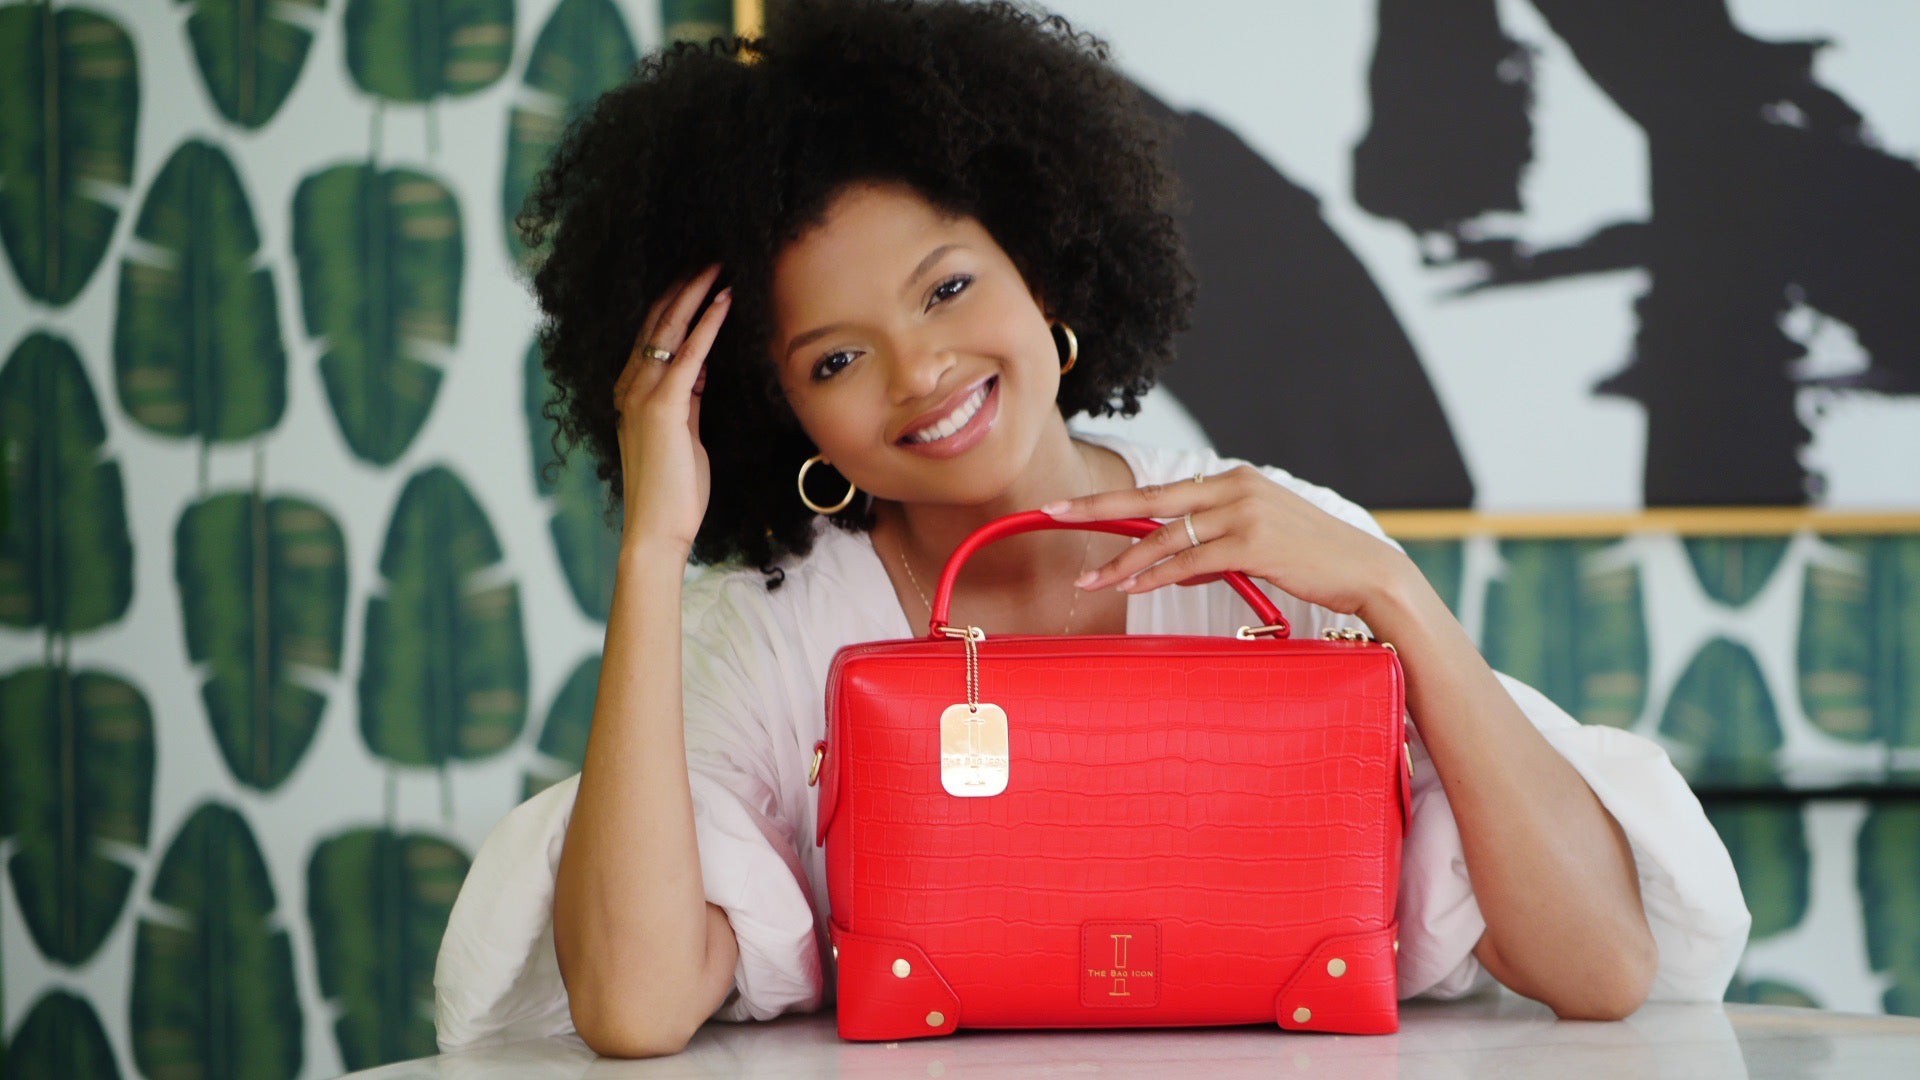 The GRANDMERE Trunk Handbag: The Perfect Christmas Gift for the Woman in Your Life